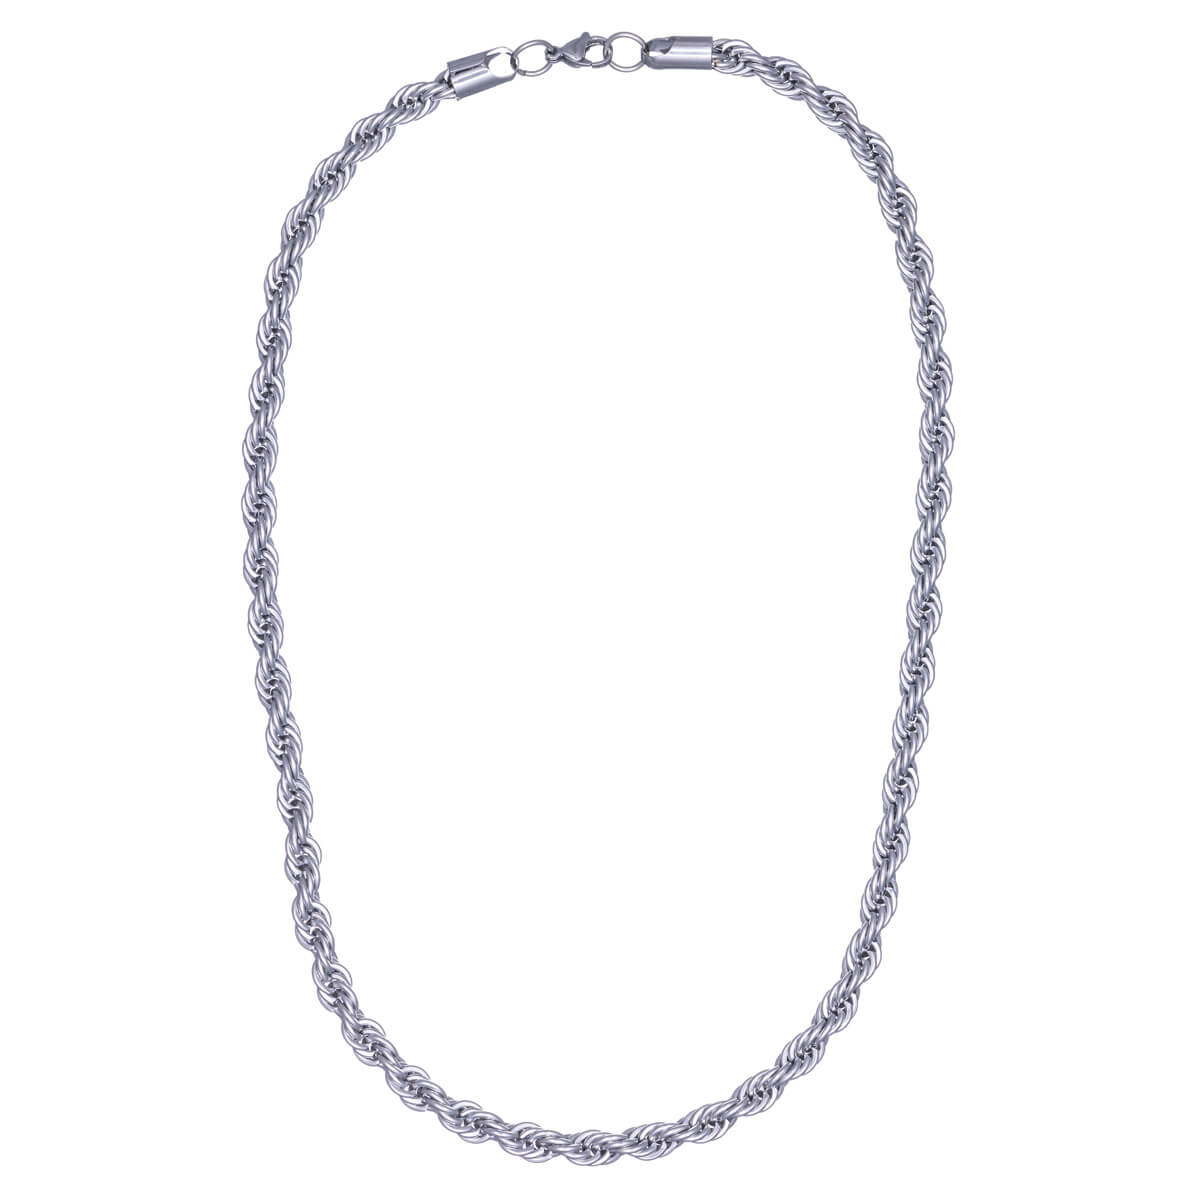 Rope chain steel cord chain necklace 7mm 60cm (Steel 316L)